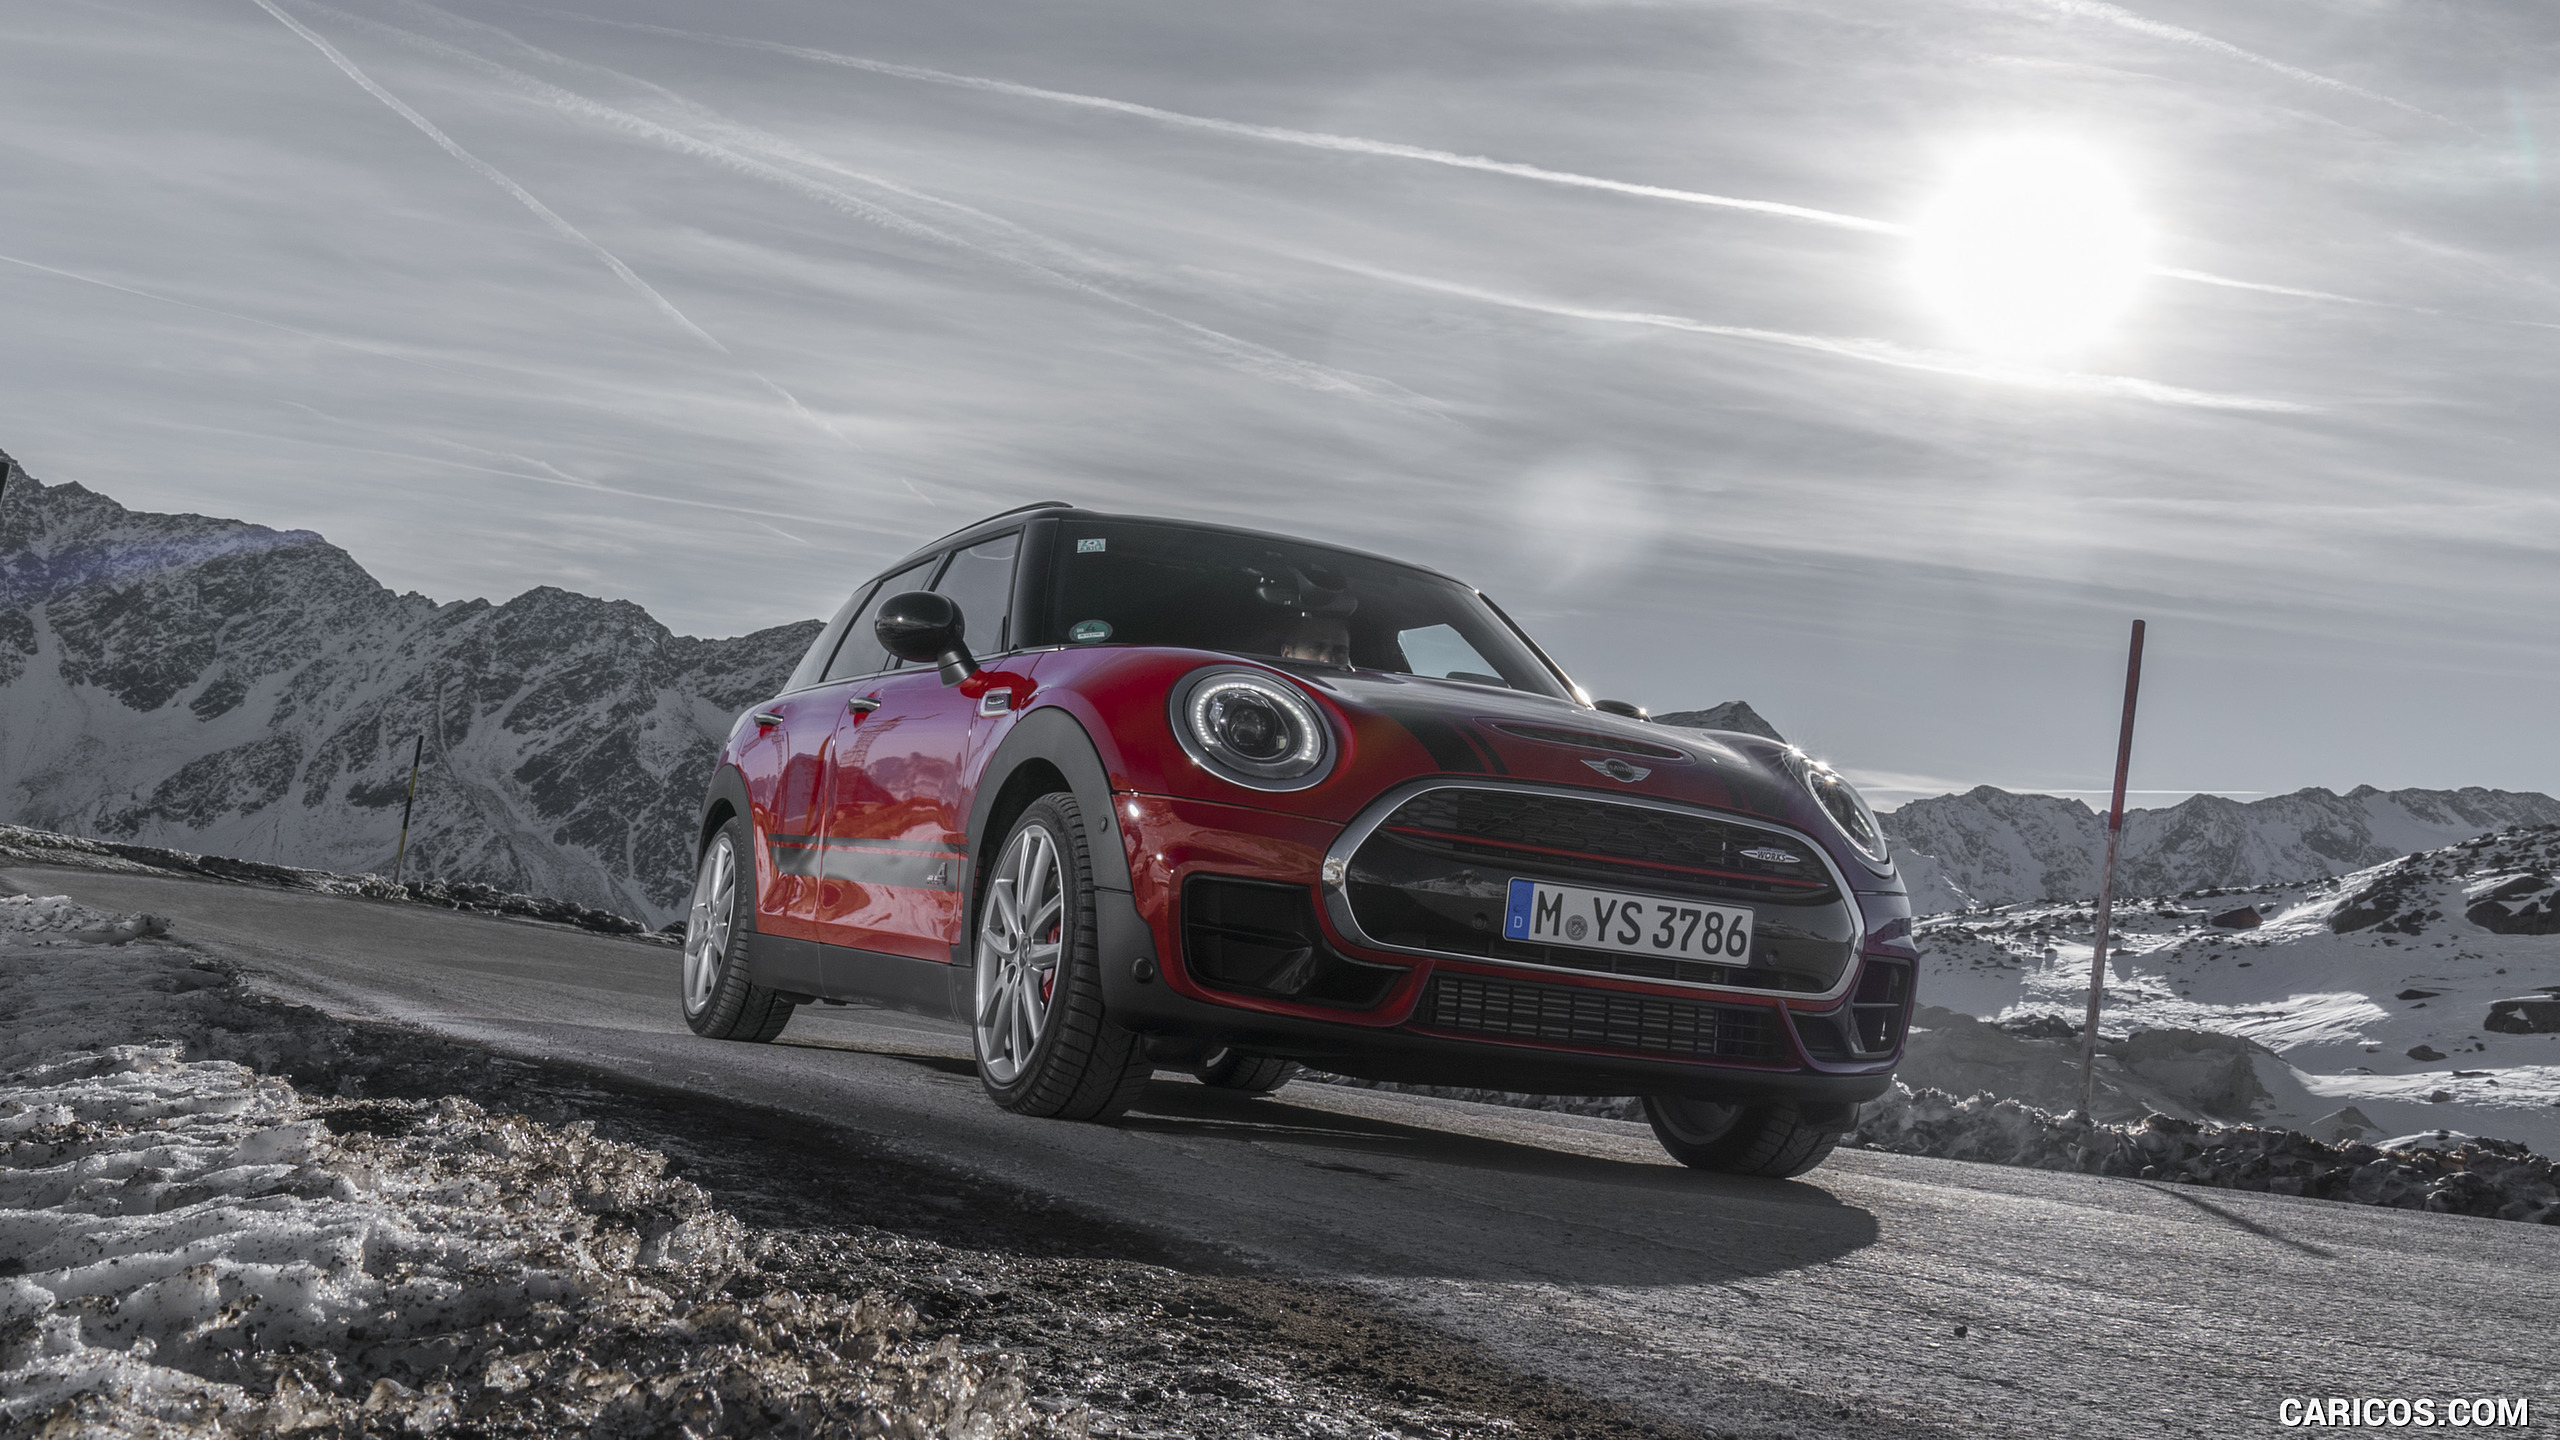 2017 MINI Clubman John Cooper Works in Snow - Front, #19 of 72